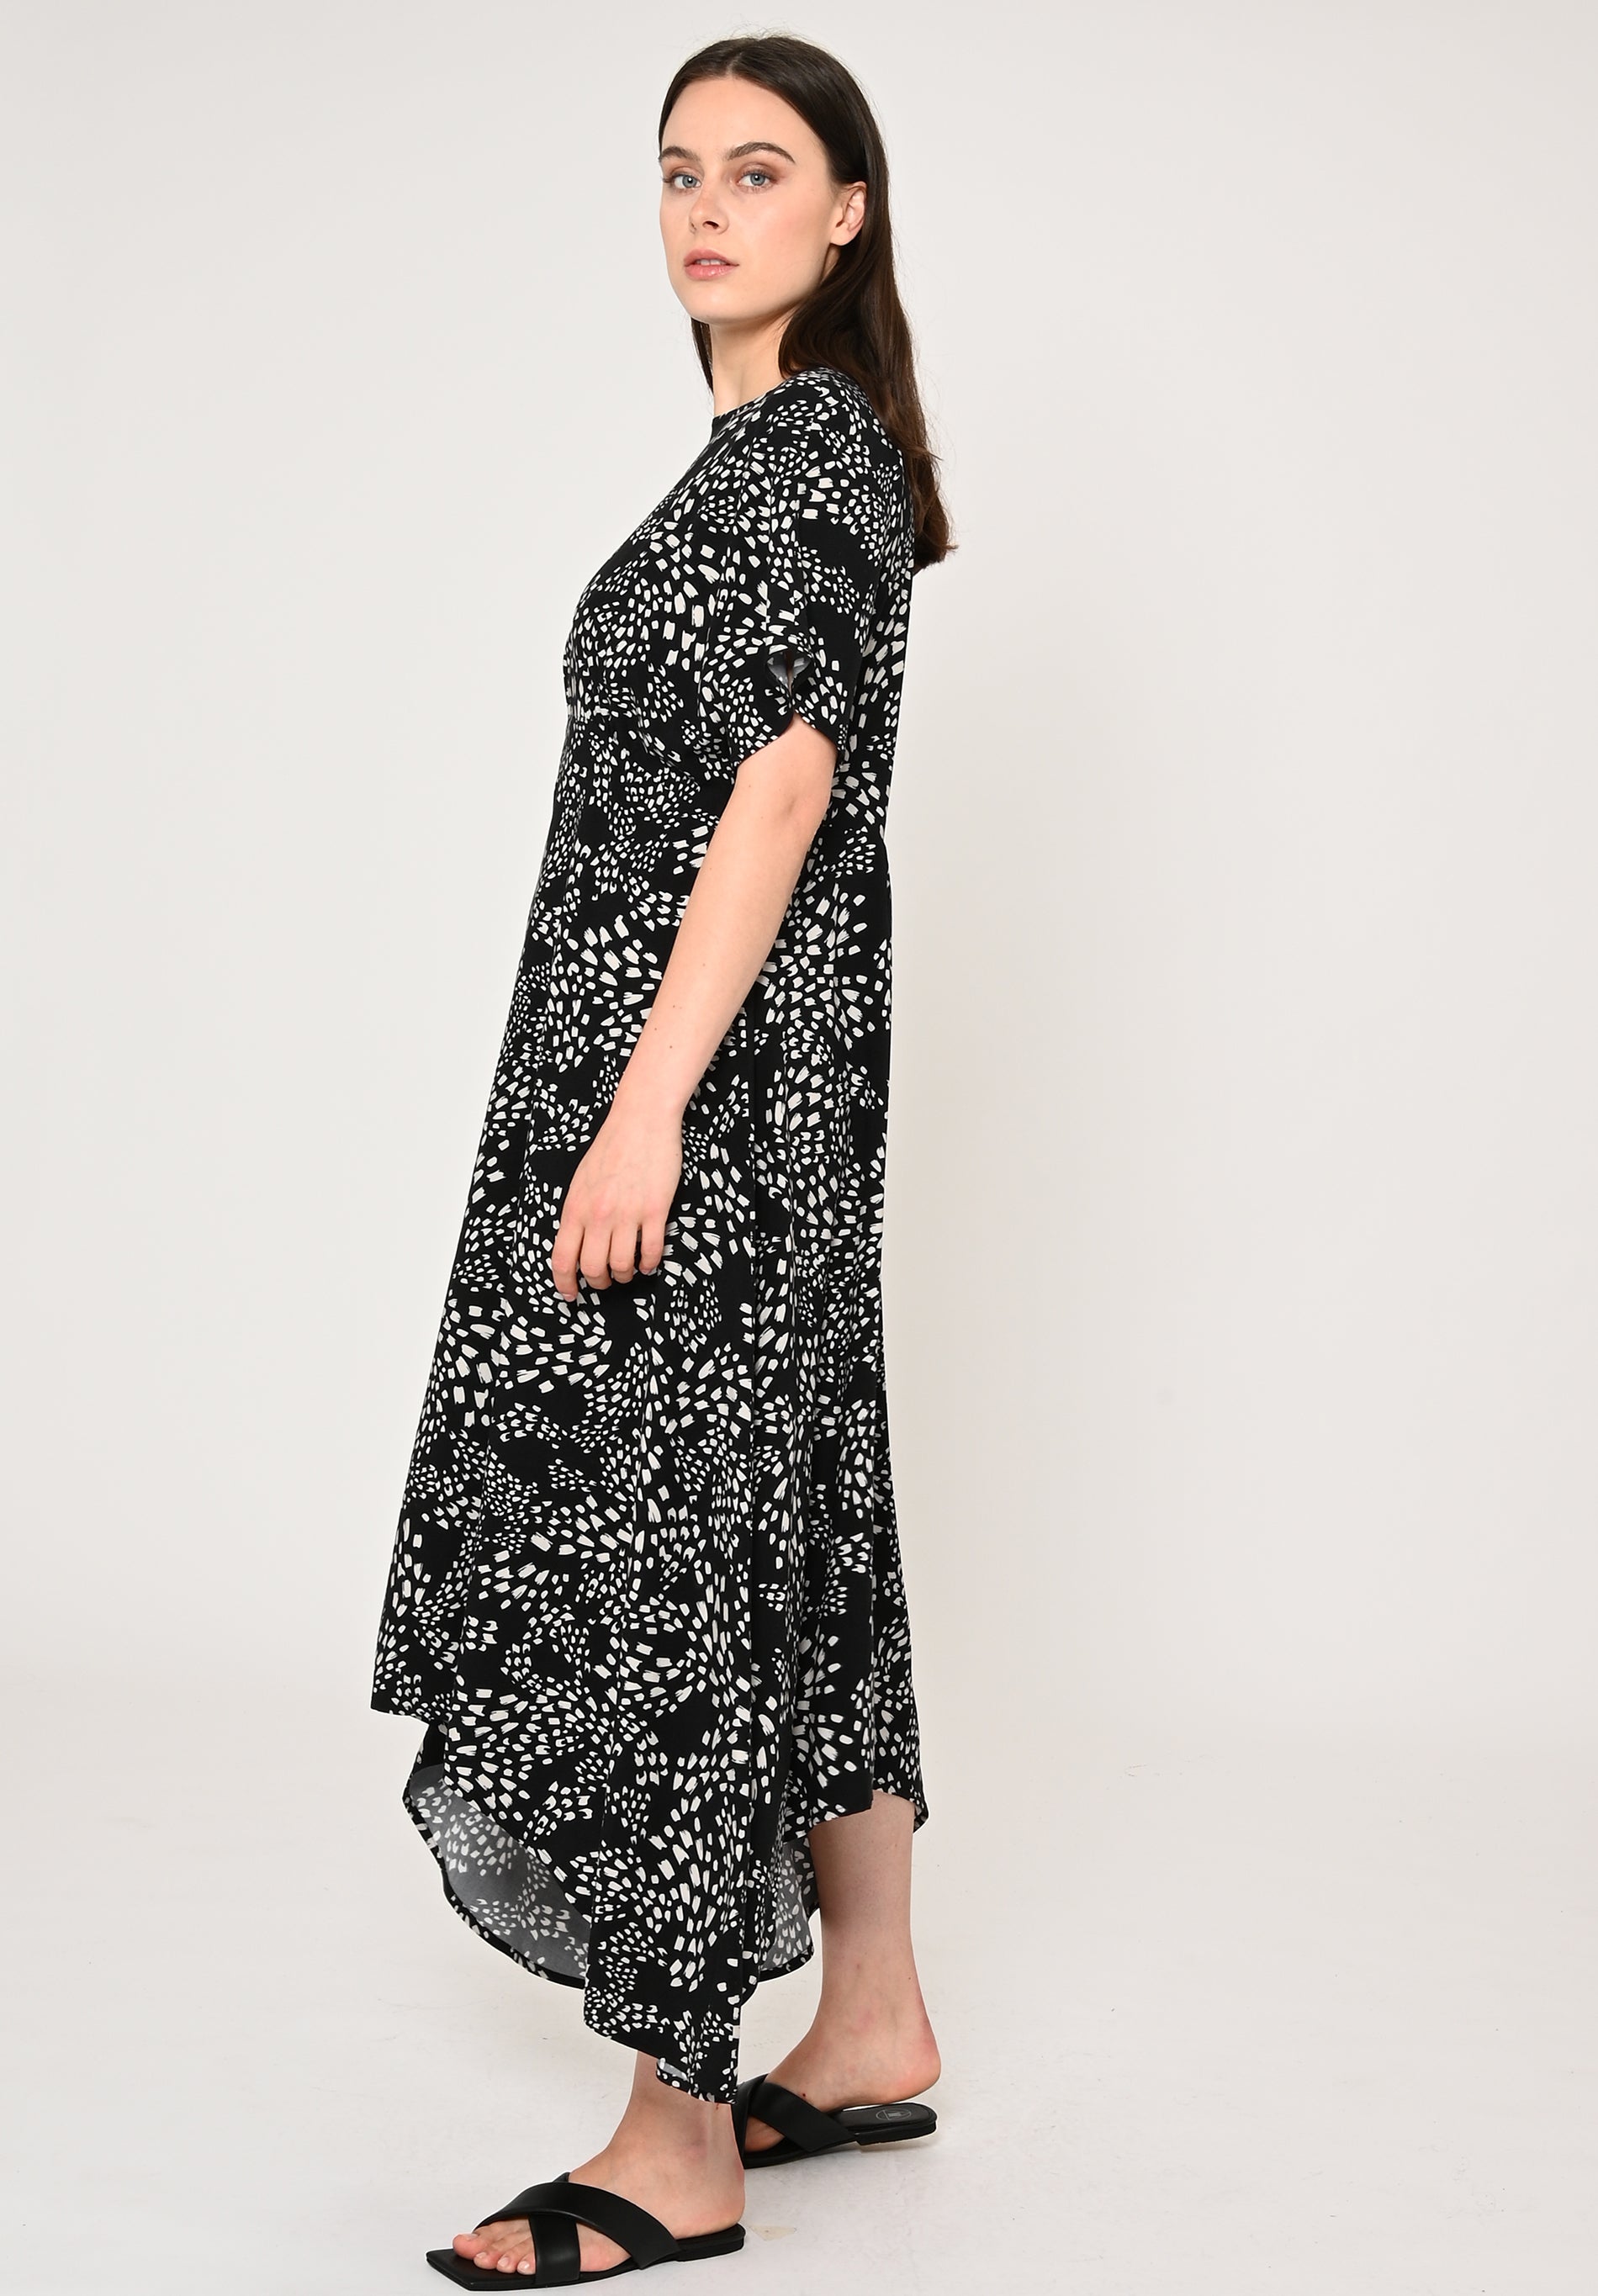 Maxi dress ODON in black and white pattern by LOVJOI made from ECOVERO™